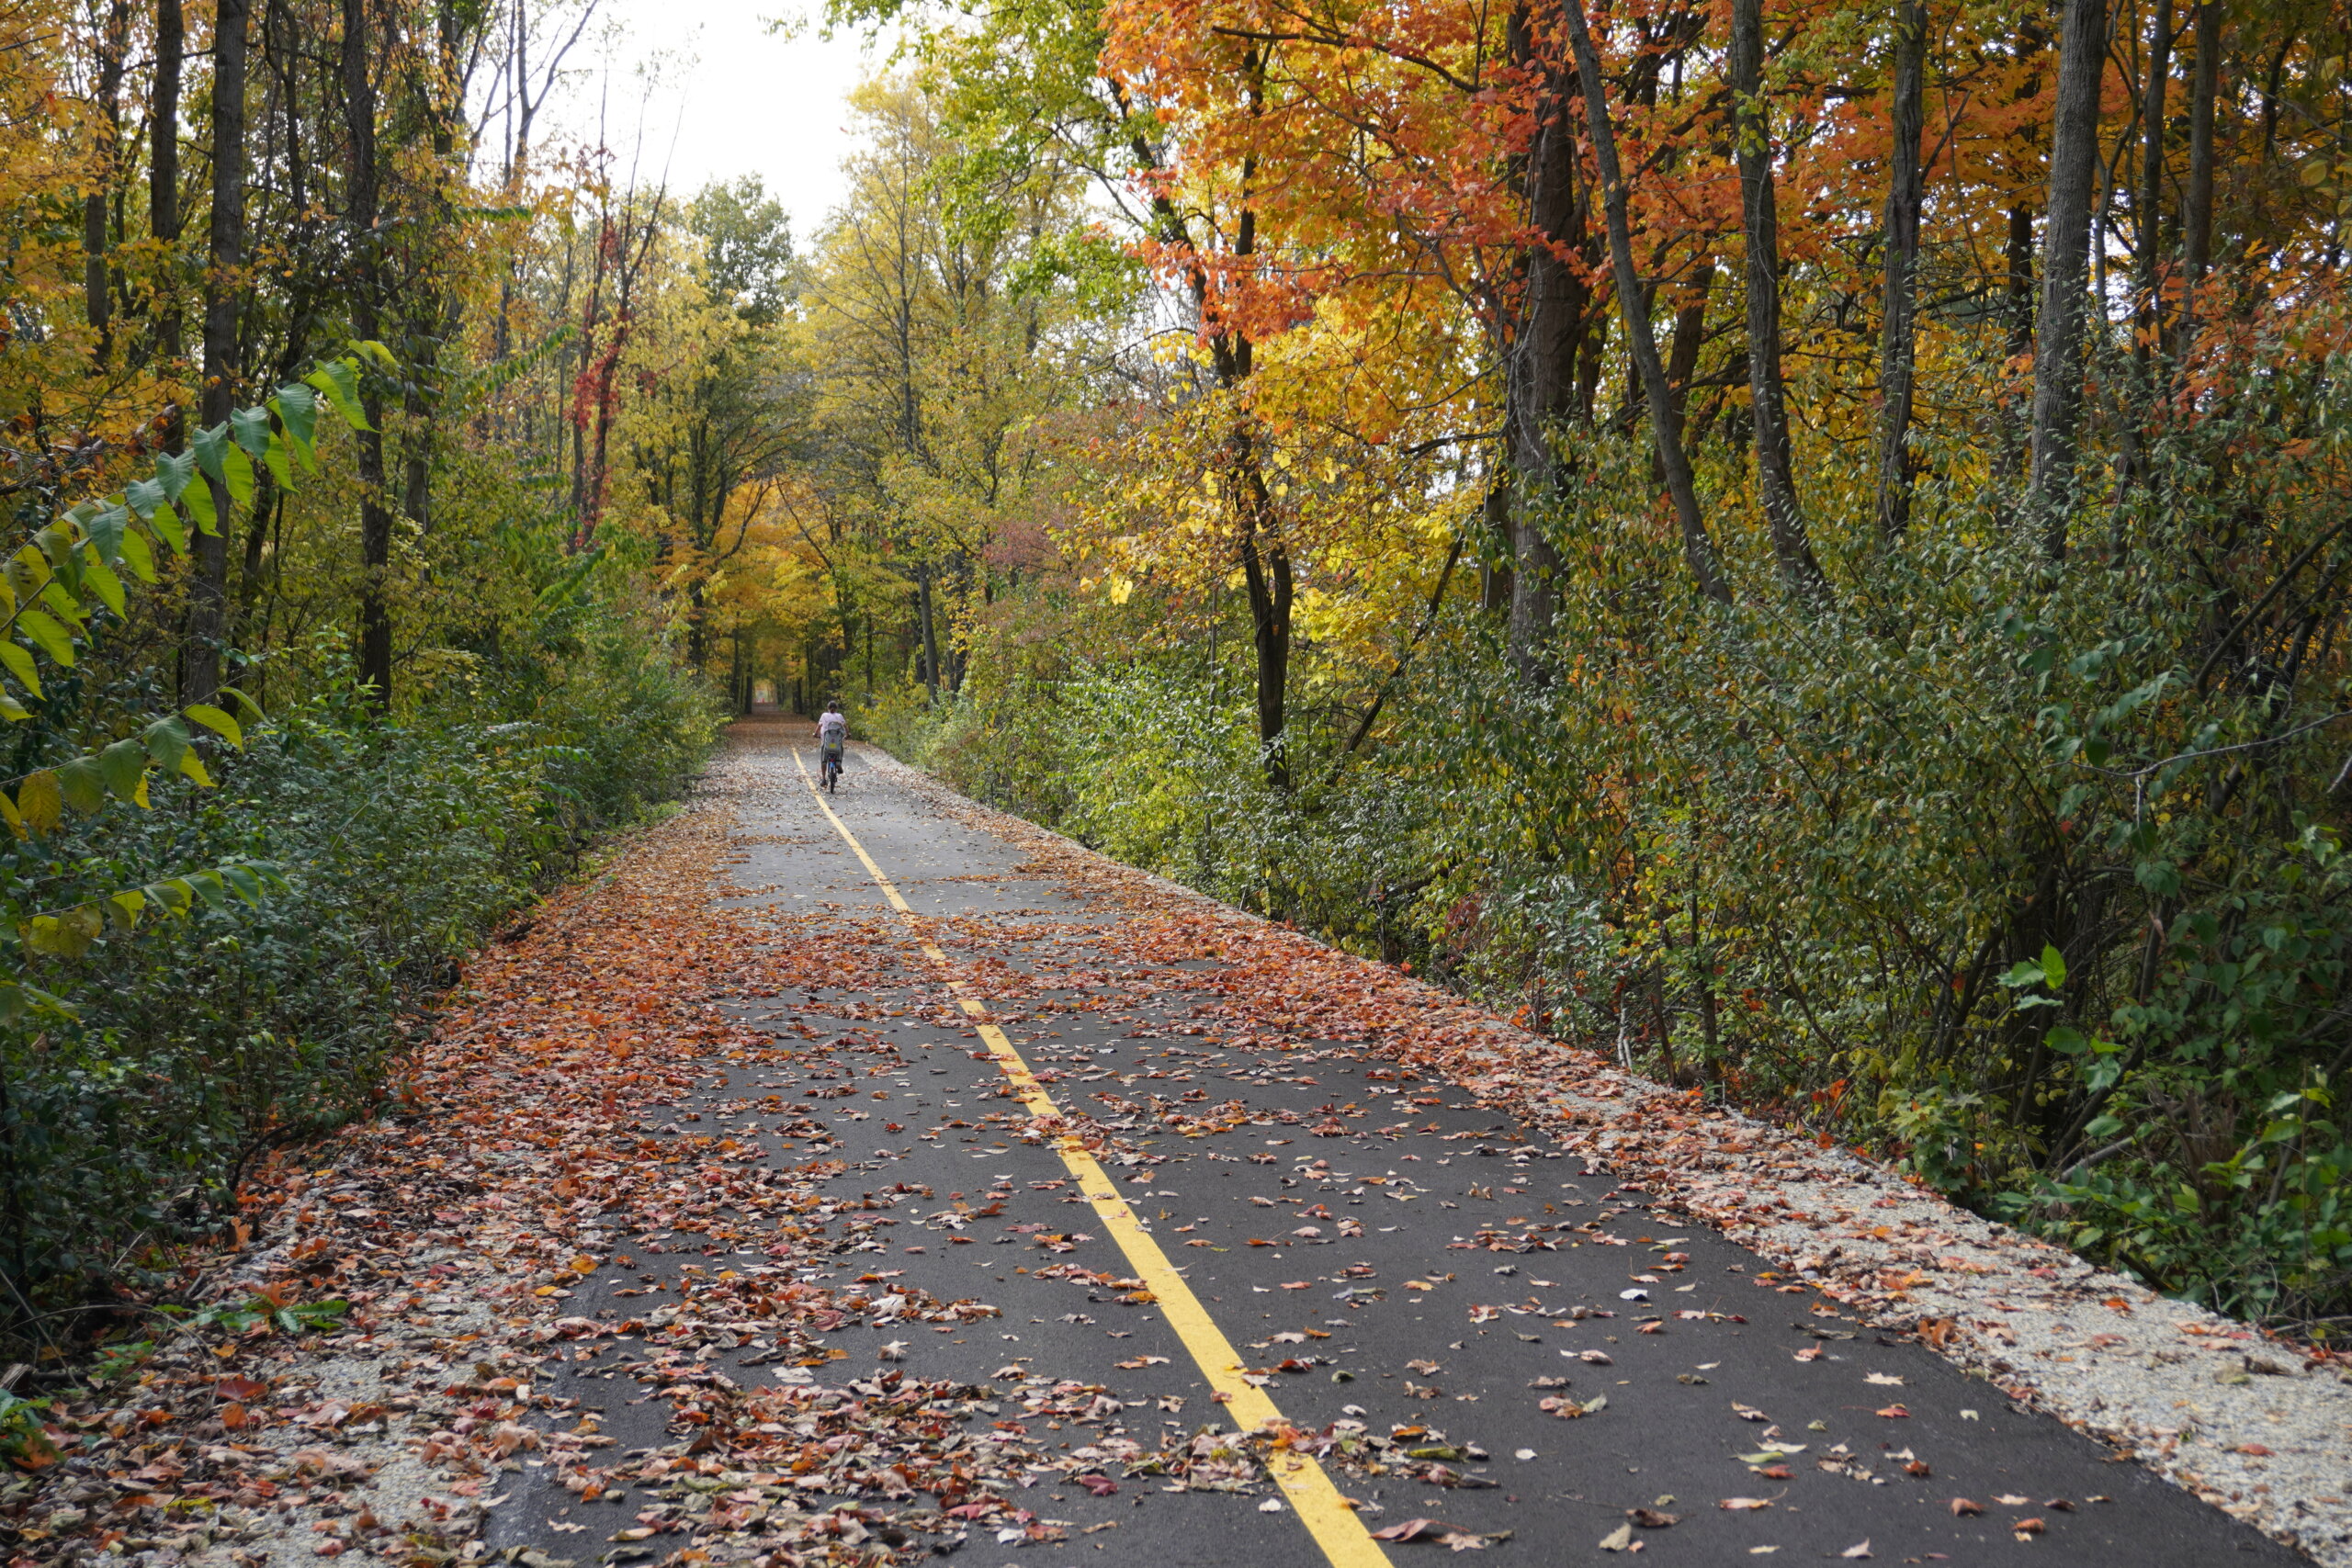 Ribbon Cutting Marks Completion of Phase Three for Wilbur Wright Trail